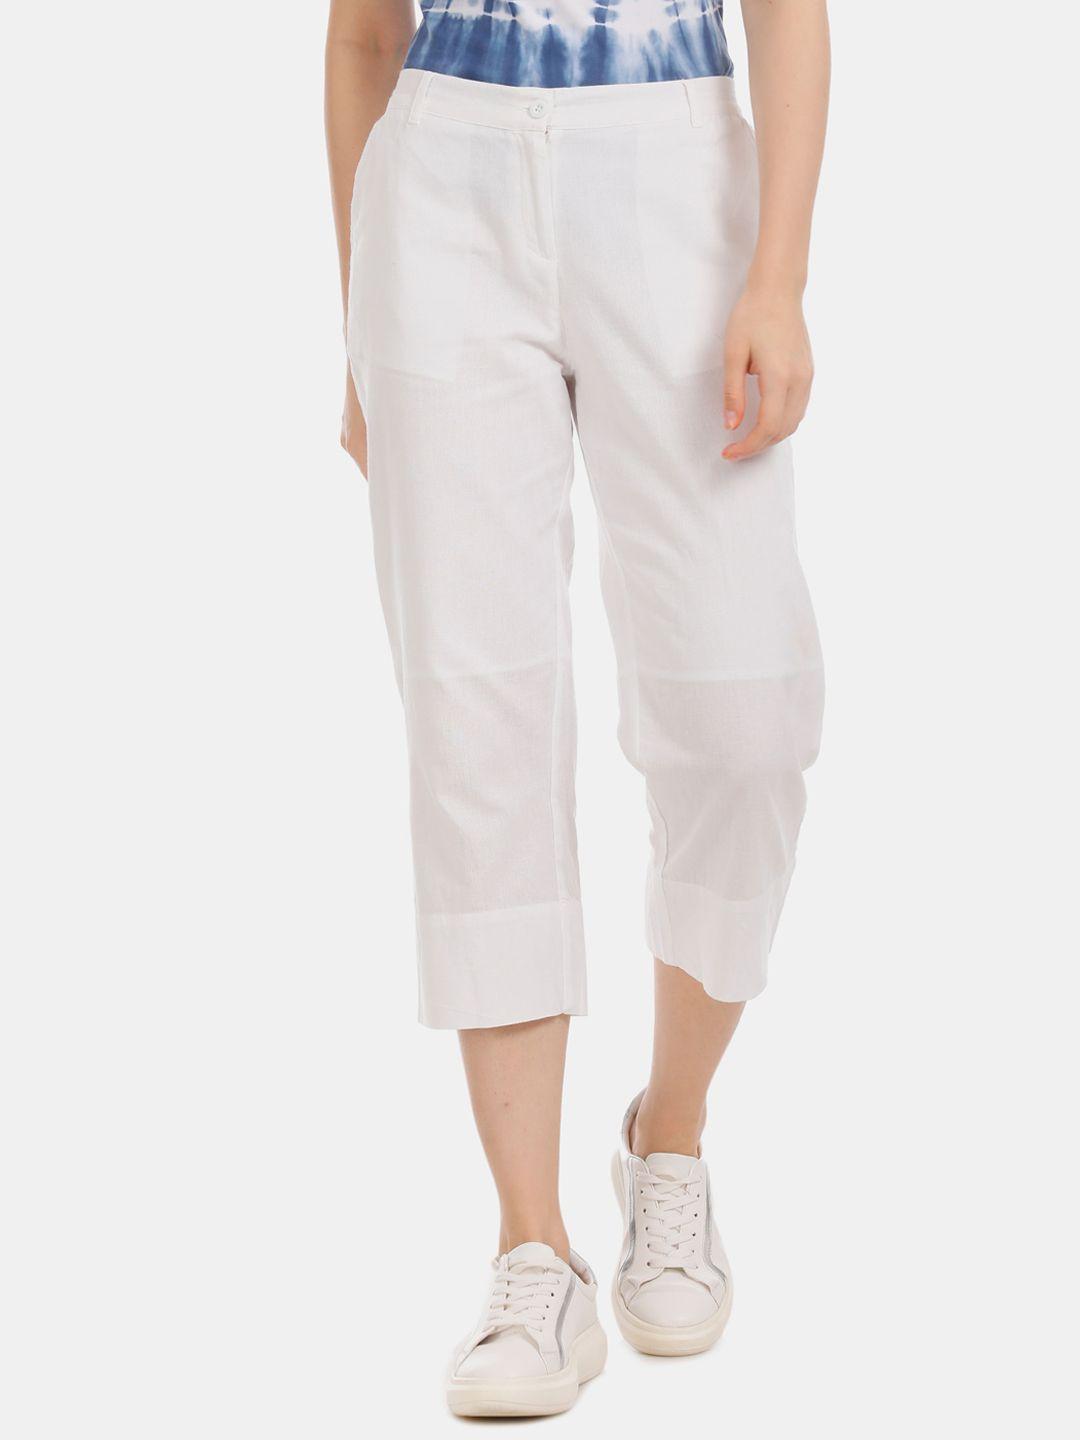 U.S. Polo Assn. Women White Regular Fit Solid Trousers